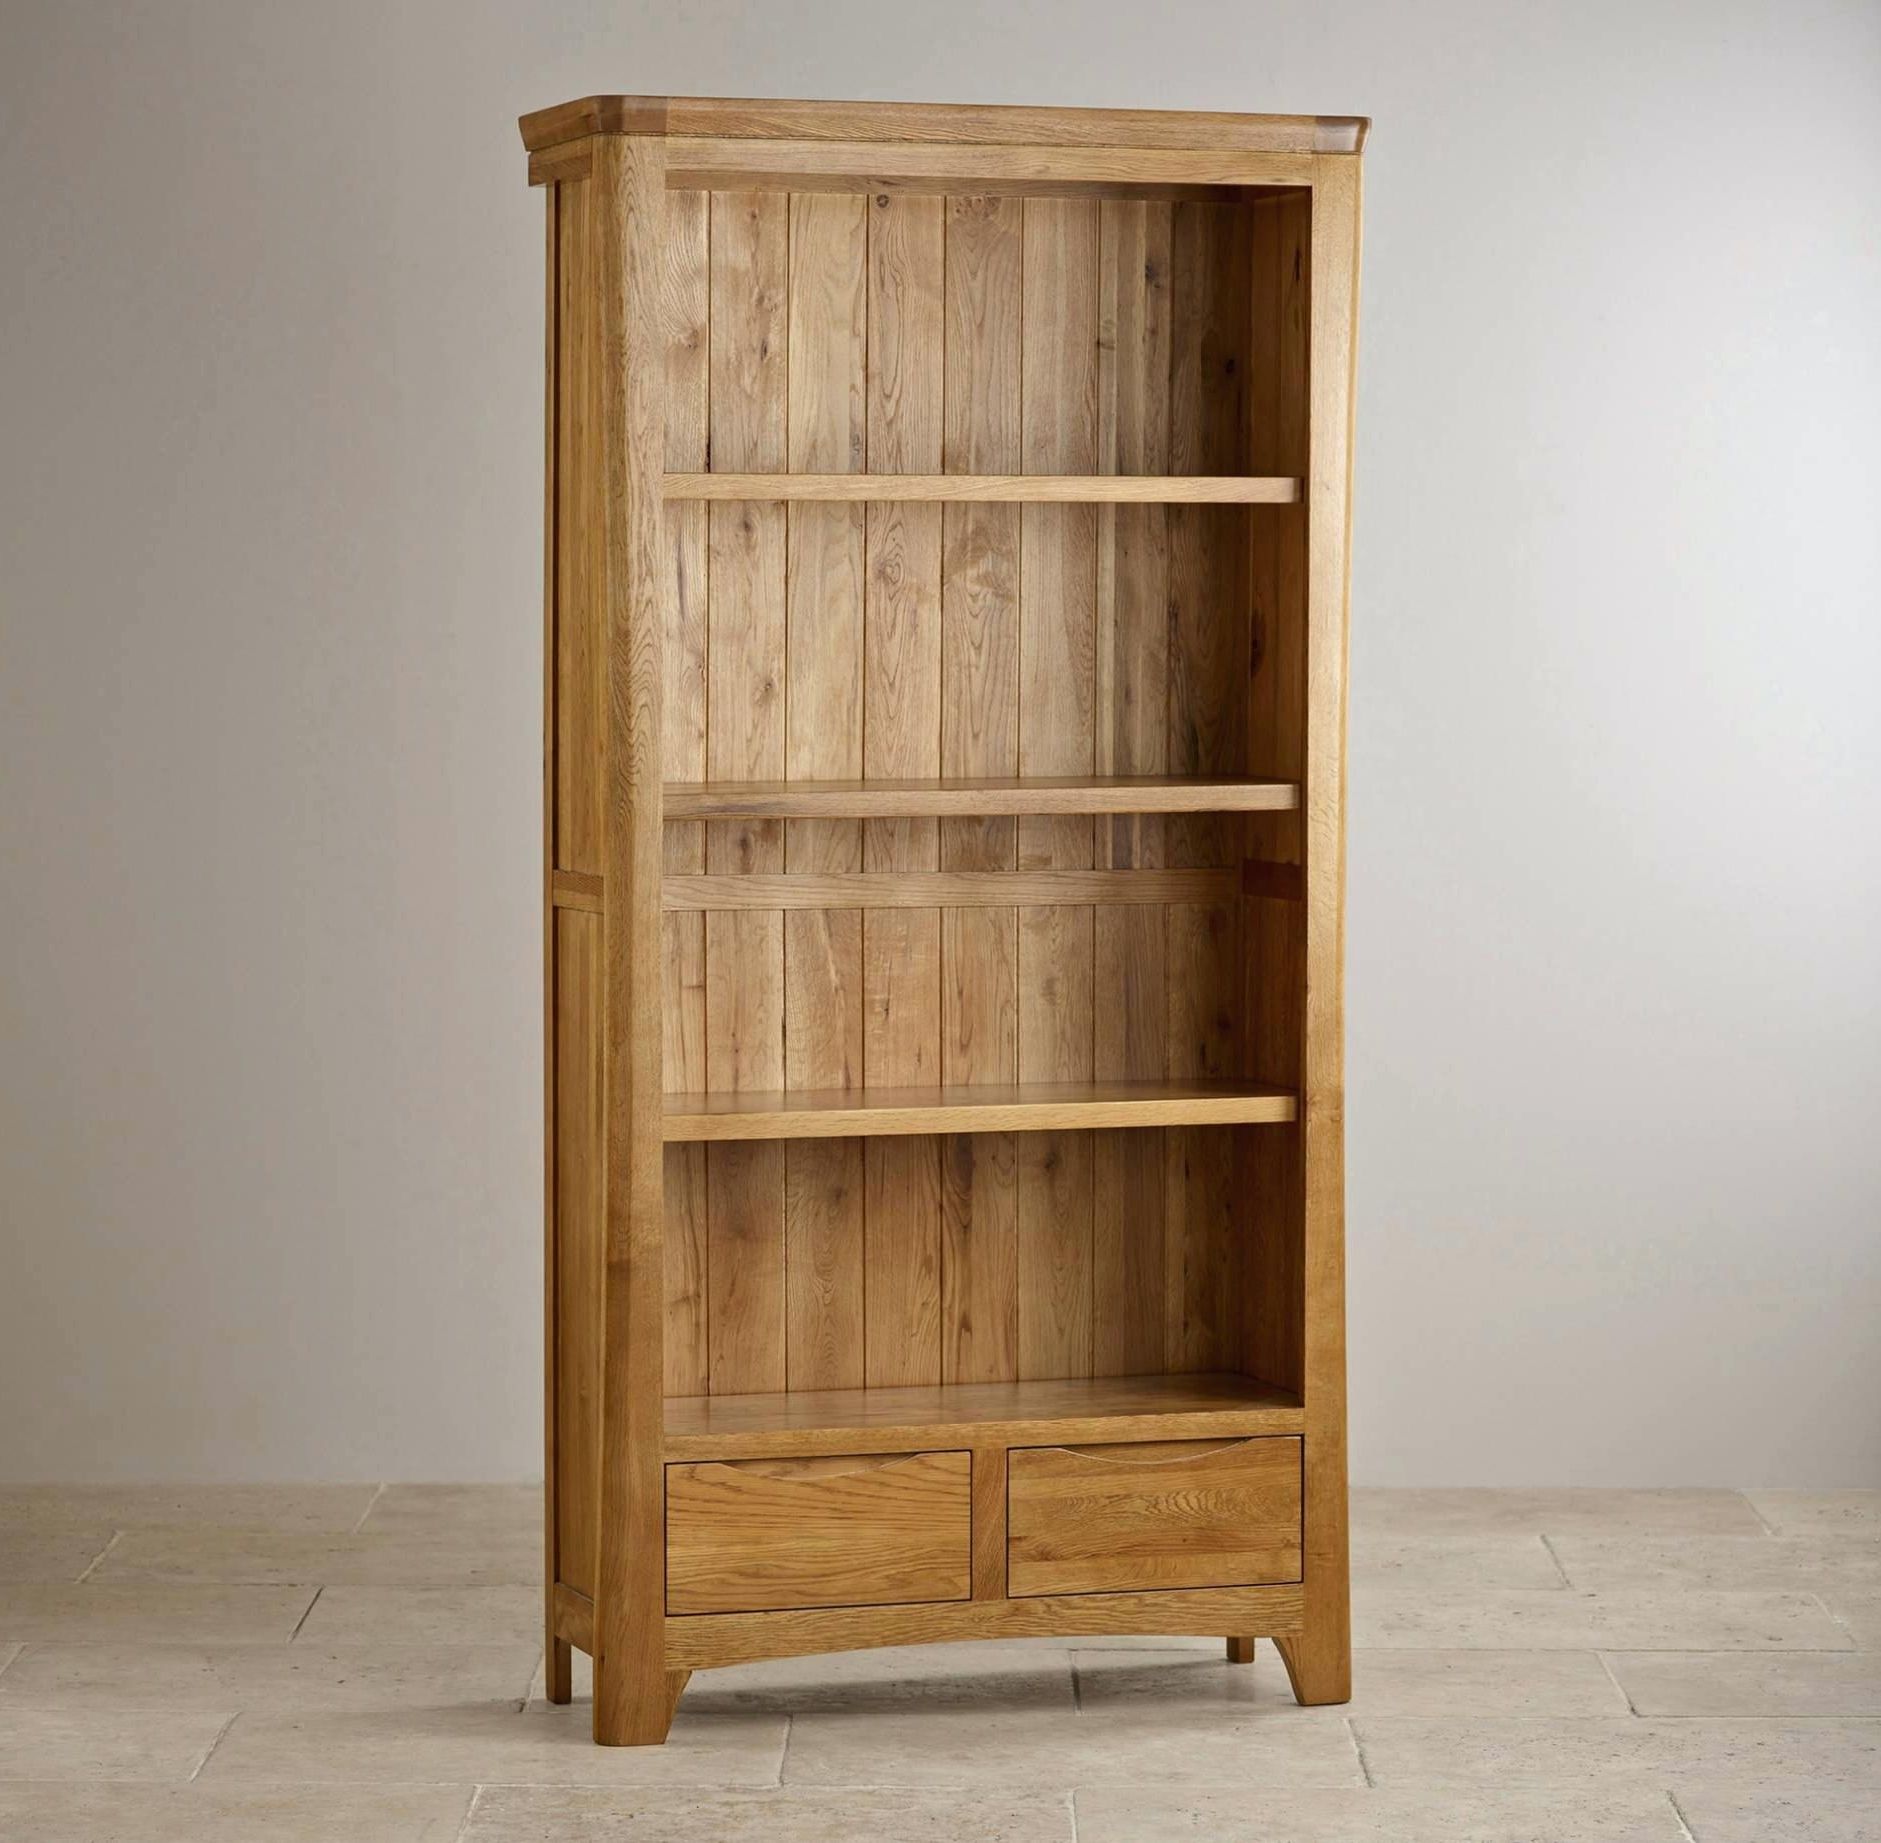 Wooden Bookcases Wooden Bookcases Costco Wooden Bookcases With Within Latest Costco Bookcases (View 8 of 15)